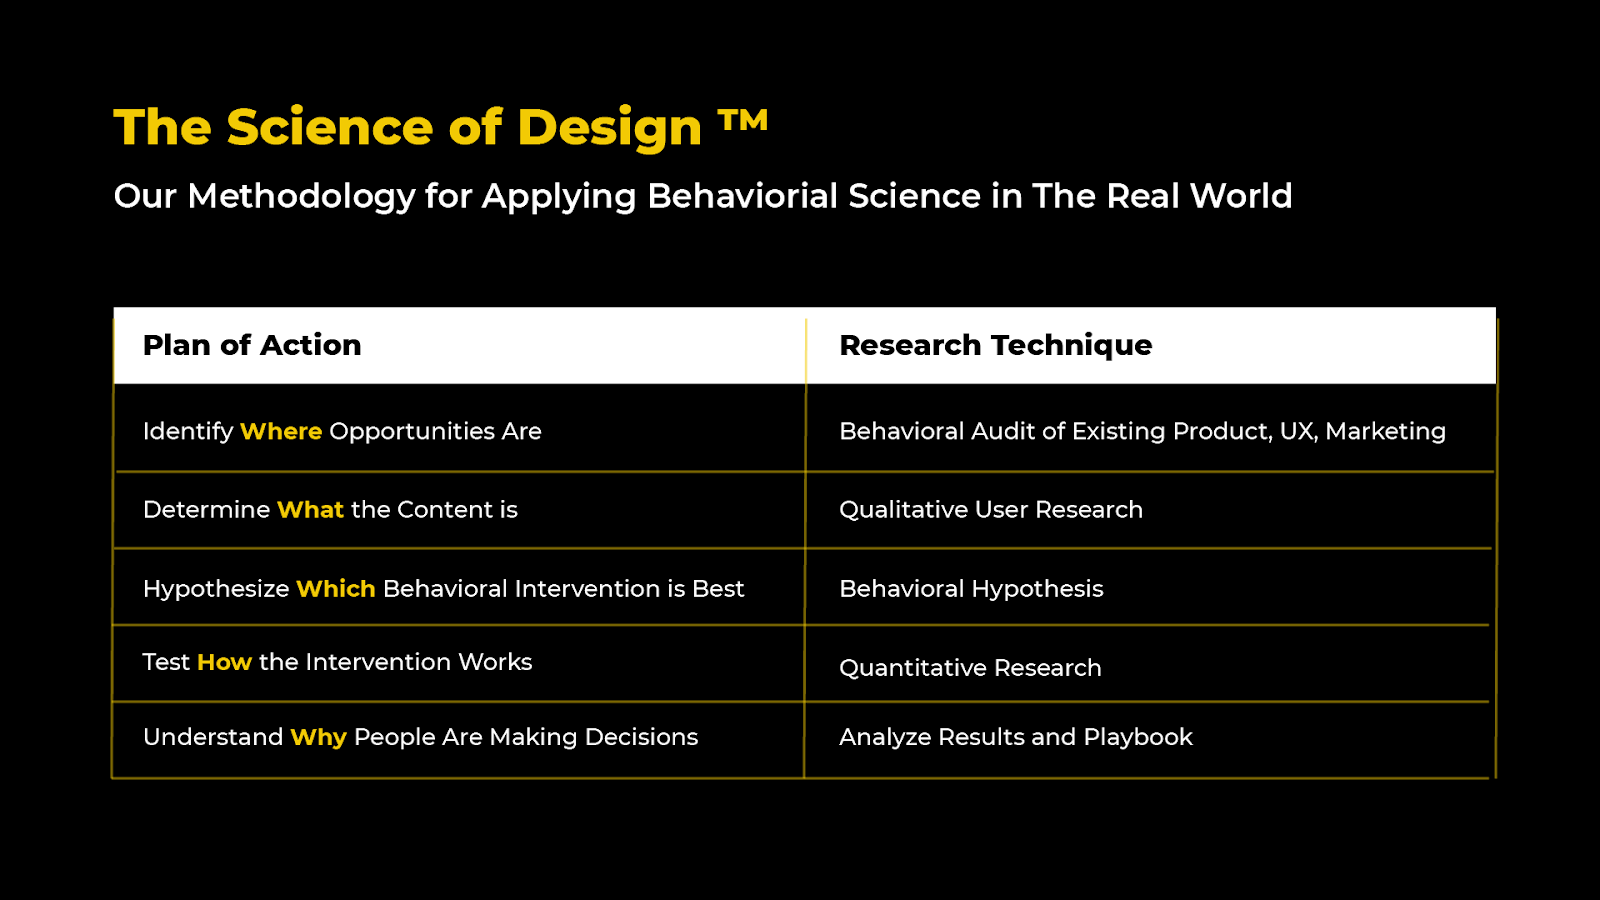 The Science of Design framework for SaaS customer research
